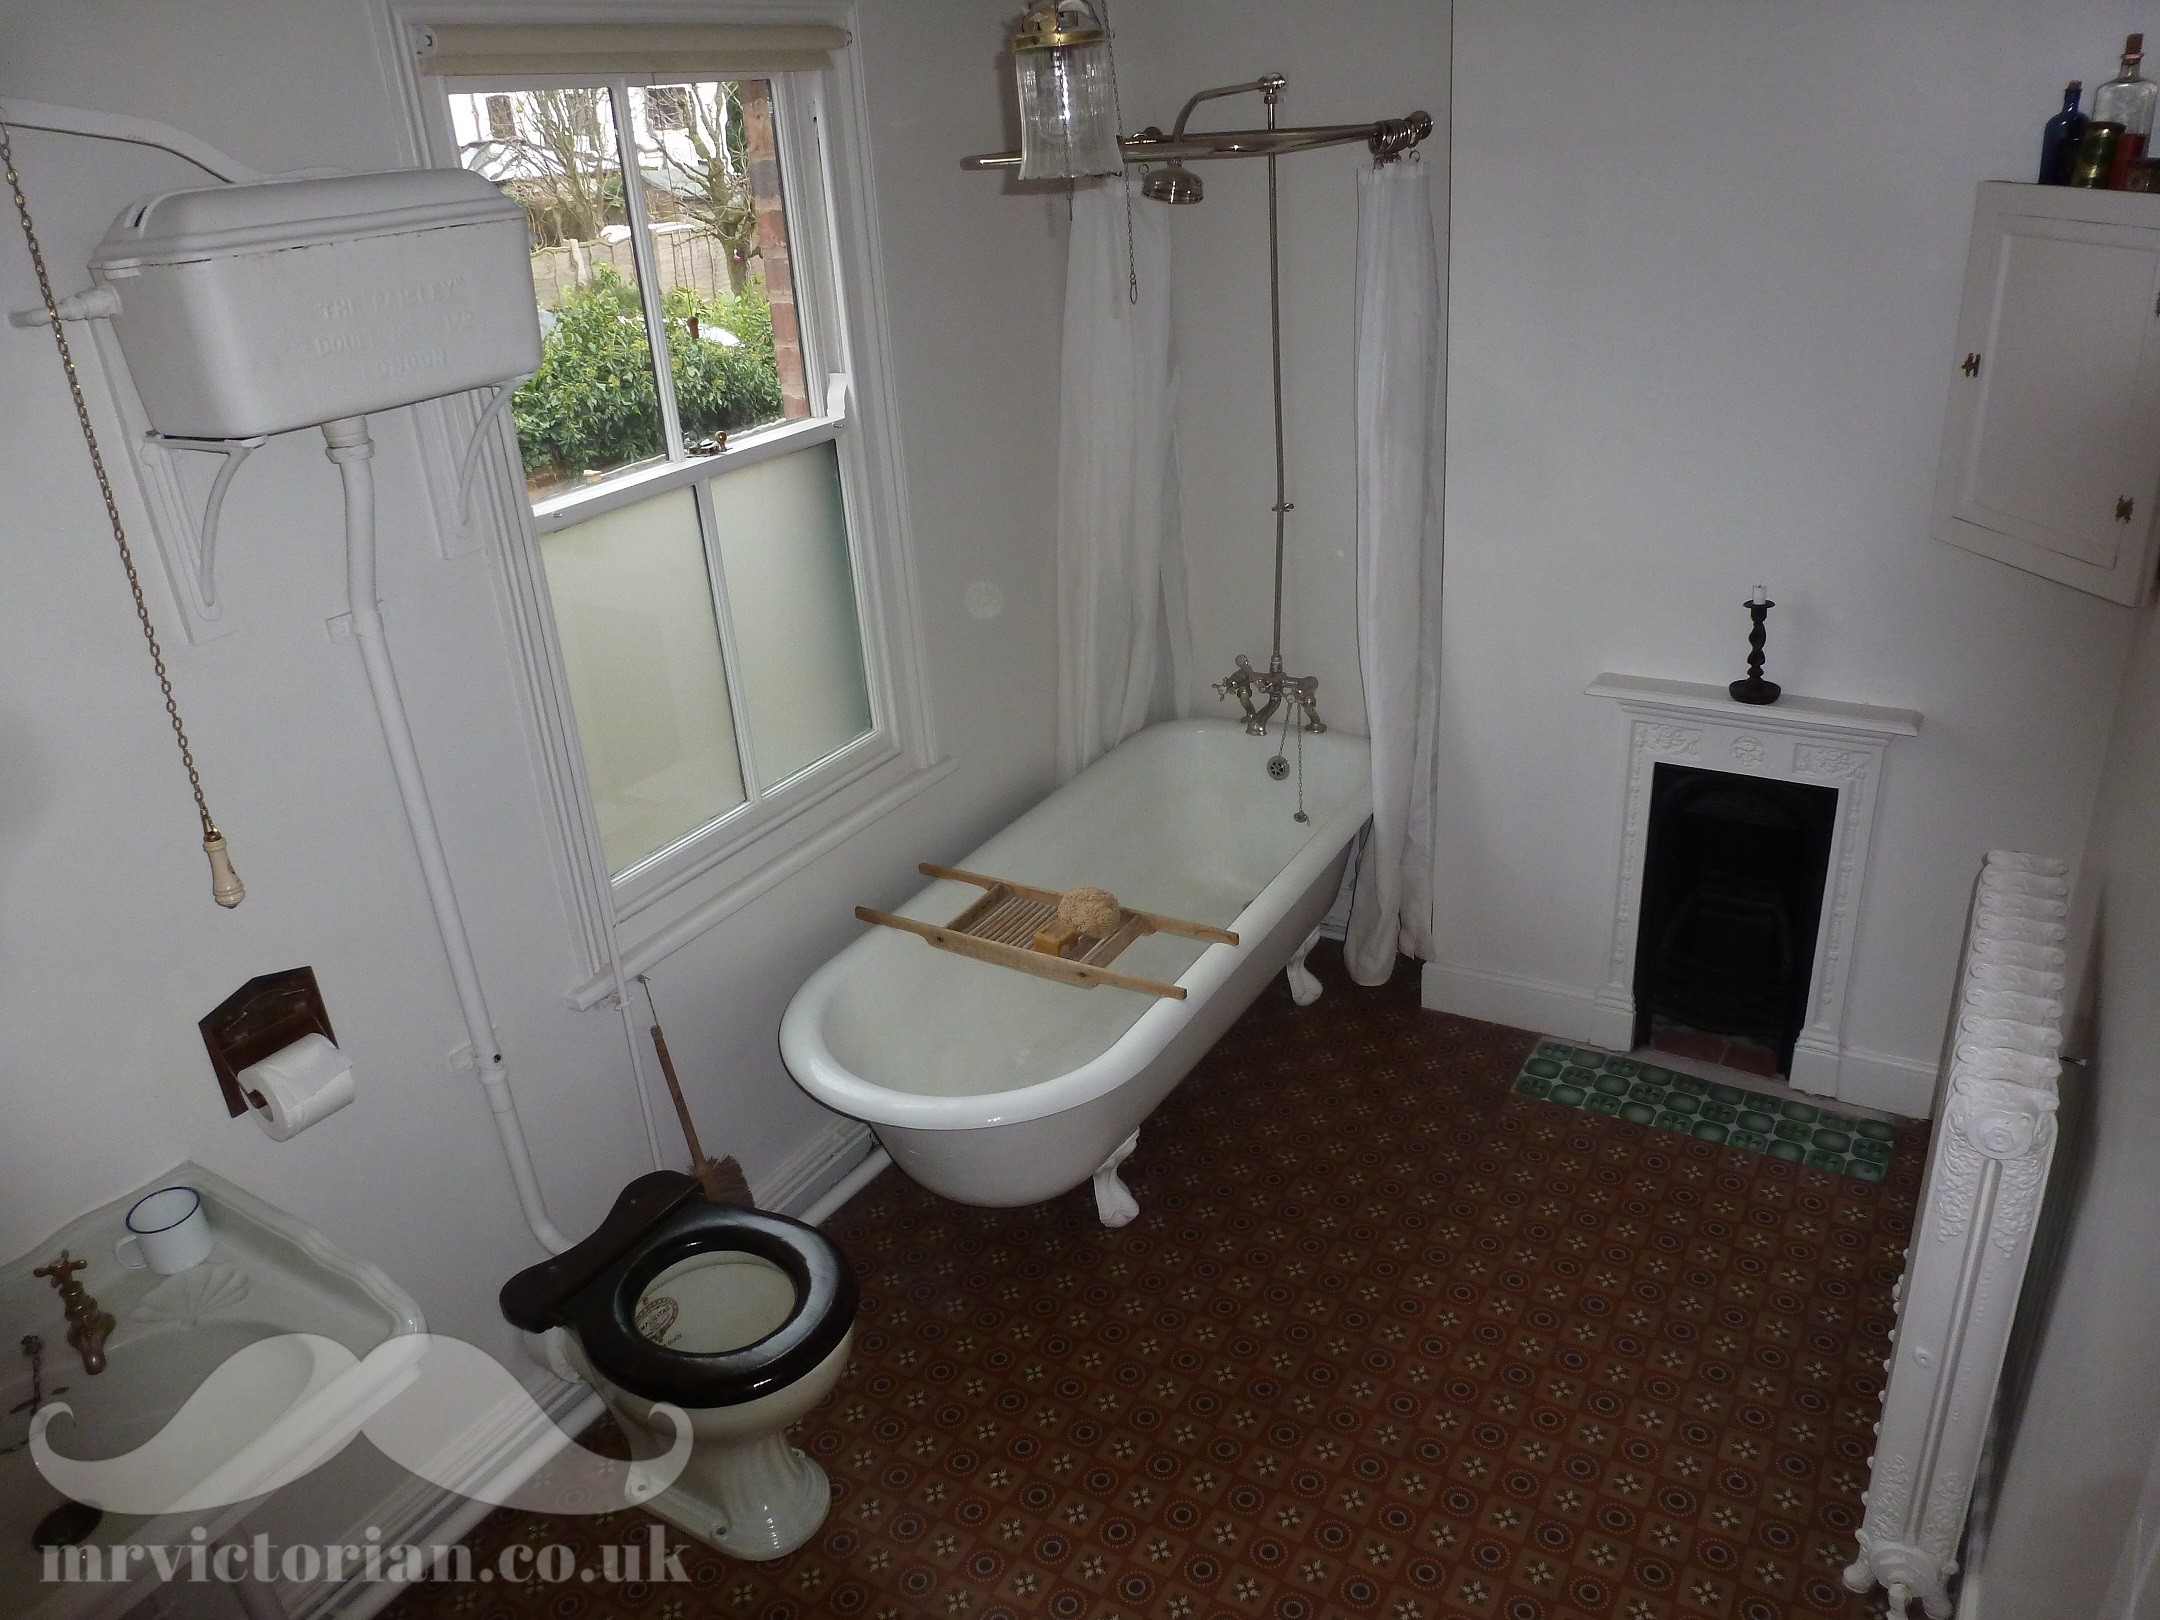 Edwardian bathroom with original fittings Victorian house tour. Visit www.mrvictorian.co.uk